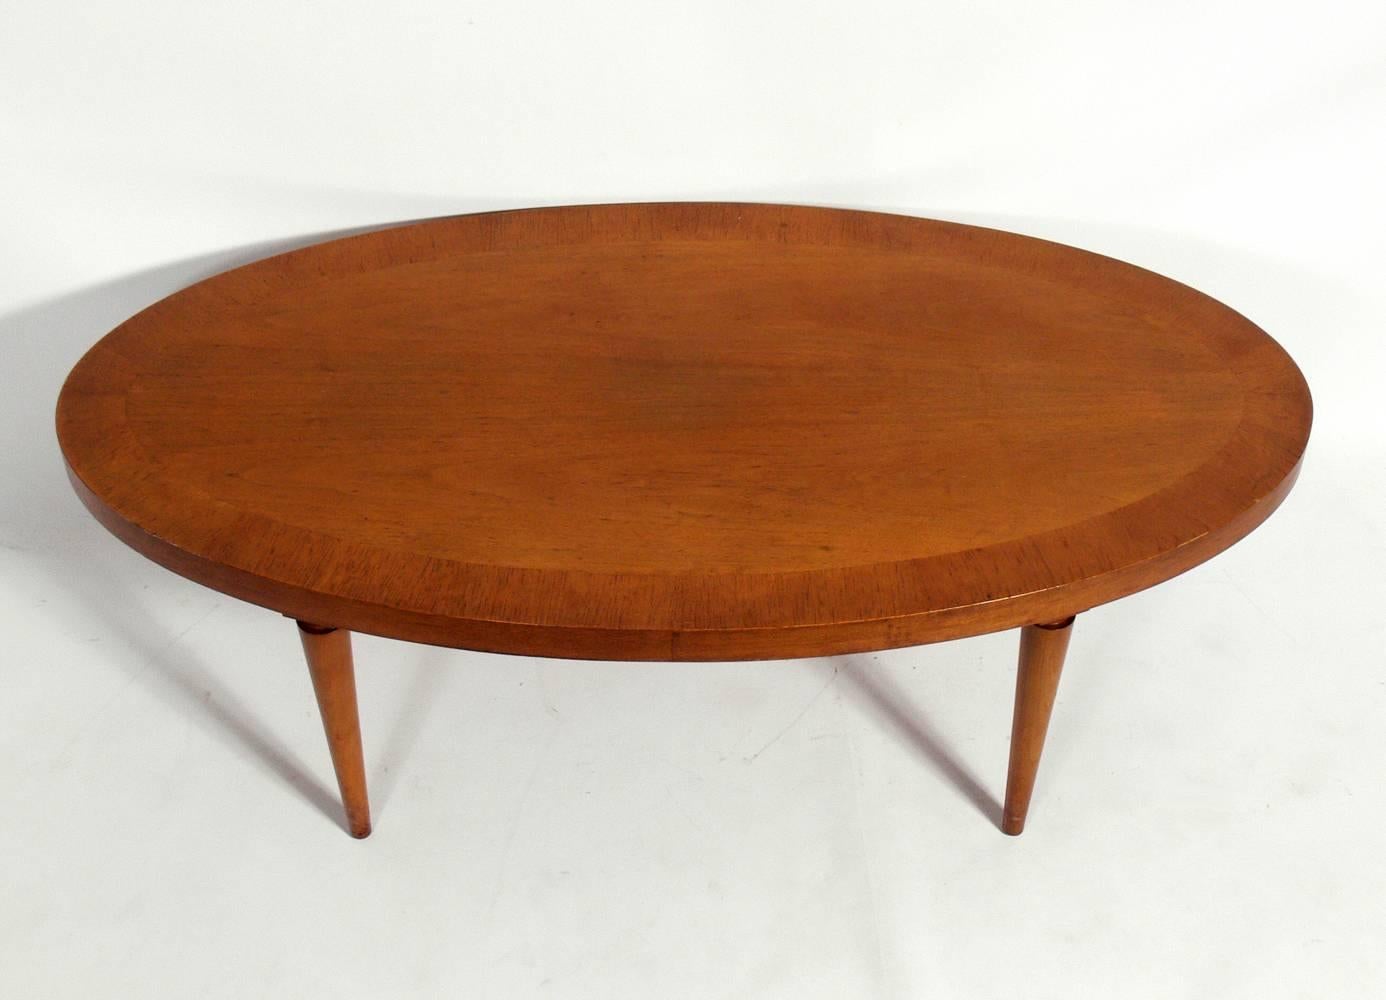 Elegant oval coffee table, designed by T.H. Robsjohn-Gibbings for Widdicomb, American, circa 1950s. This piece is currently being refinished and can be completed in your choice of color. The price noted below includes refinishing in your choice of